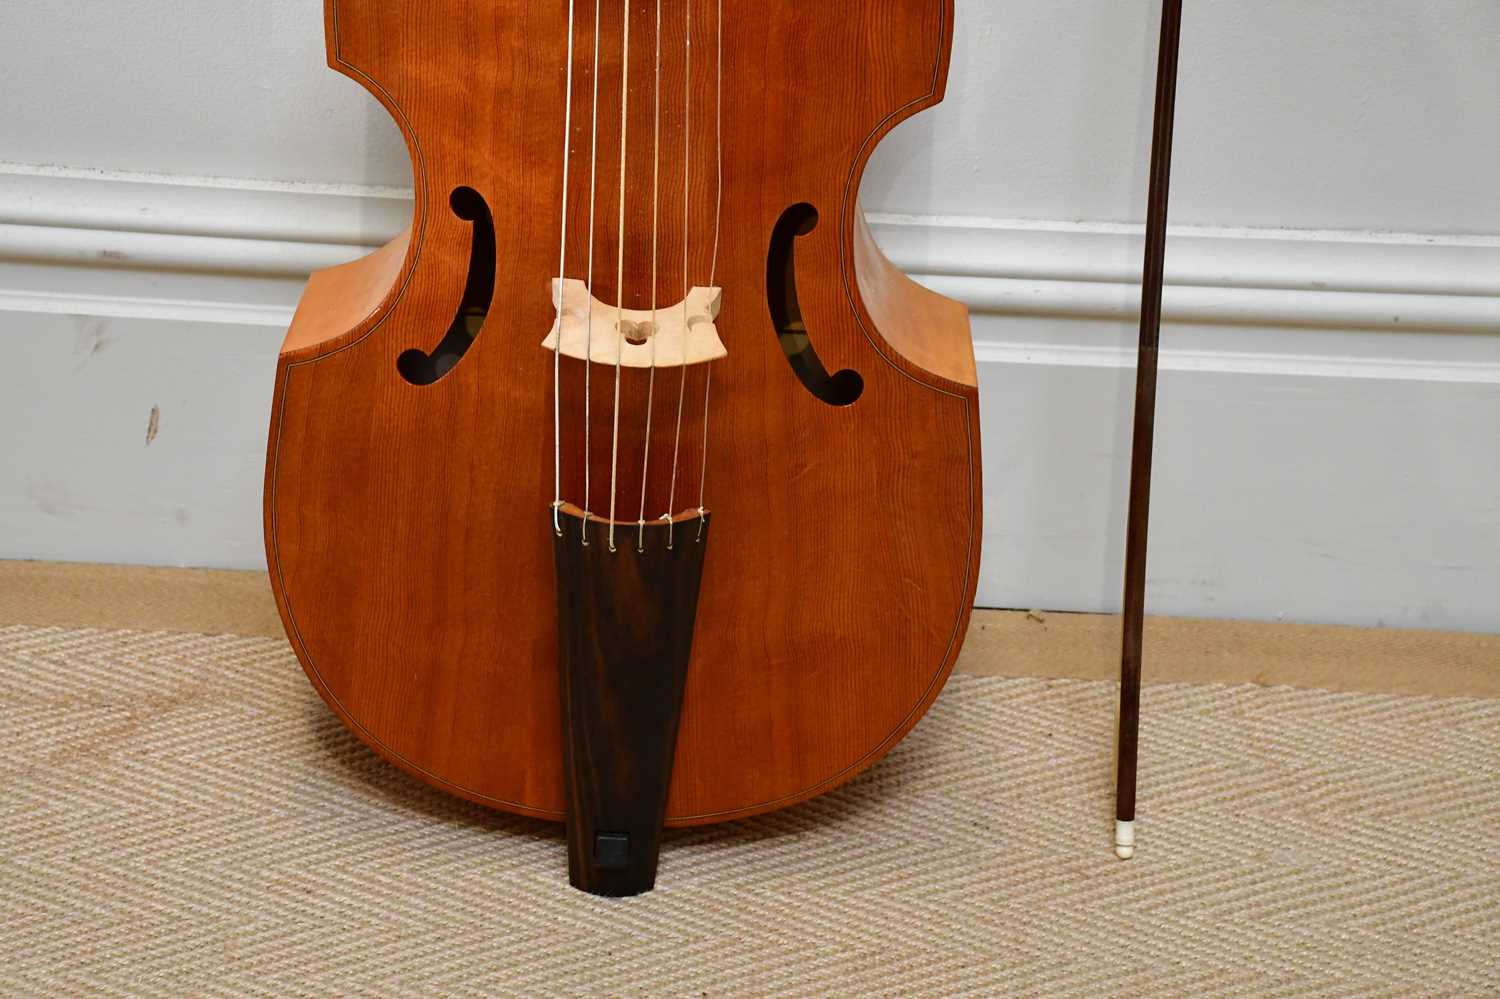 X MICHAEL PLANT; a contemporary viol labelled 'A student viol by Michael Plant Sheffield 1988', - Image 4 of 13